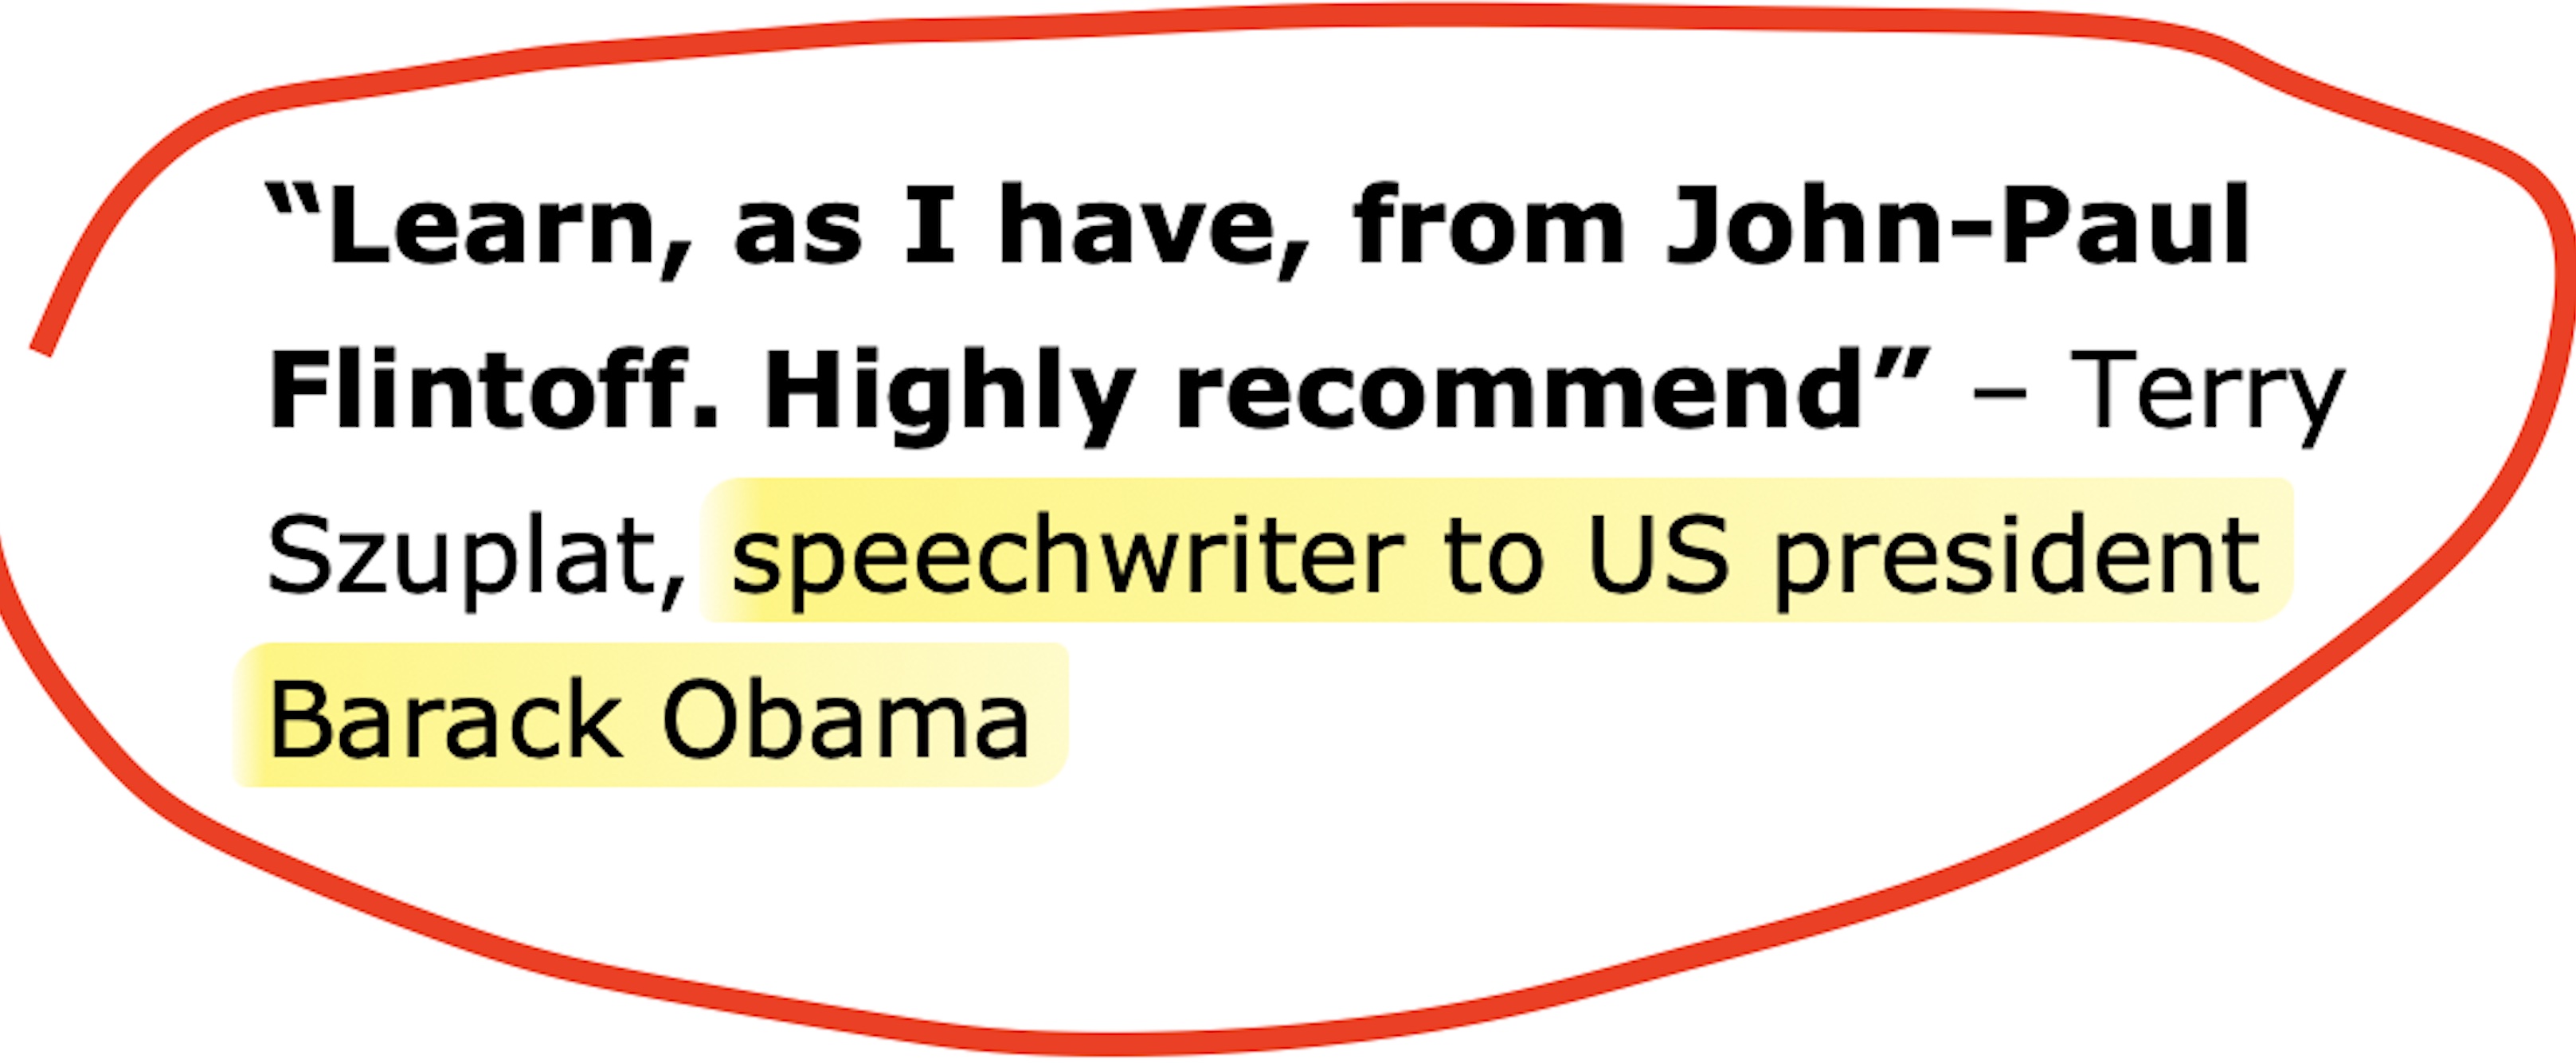 "Learn, as I have, from John-Paul Flintoff. Highly recommend" - Terry Szuplat, speechwriter to US president Barack Obama